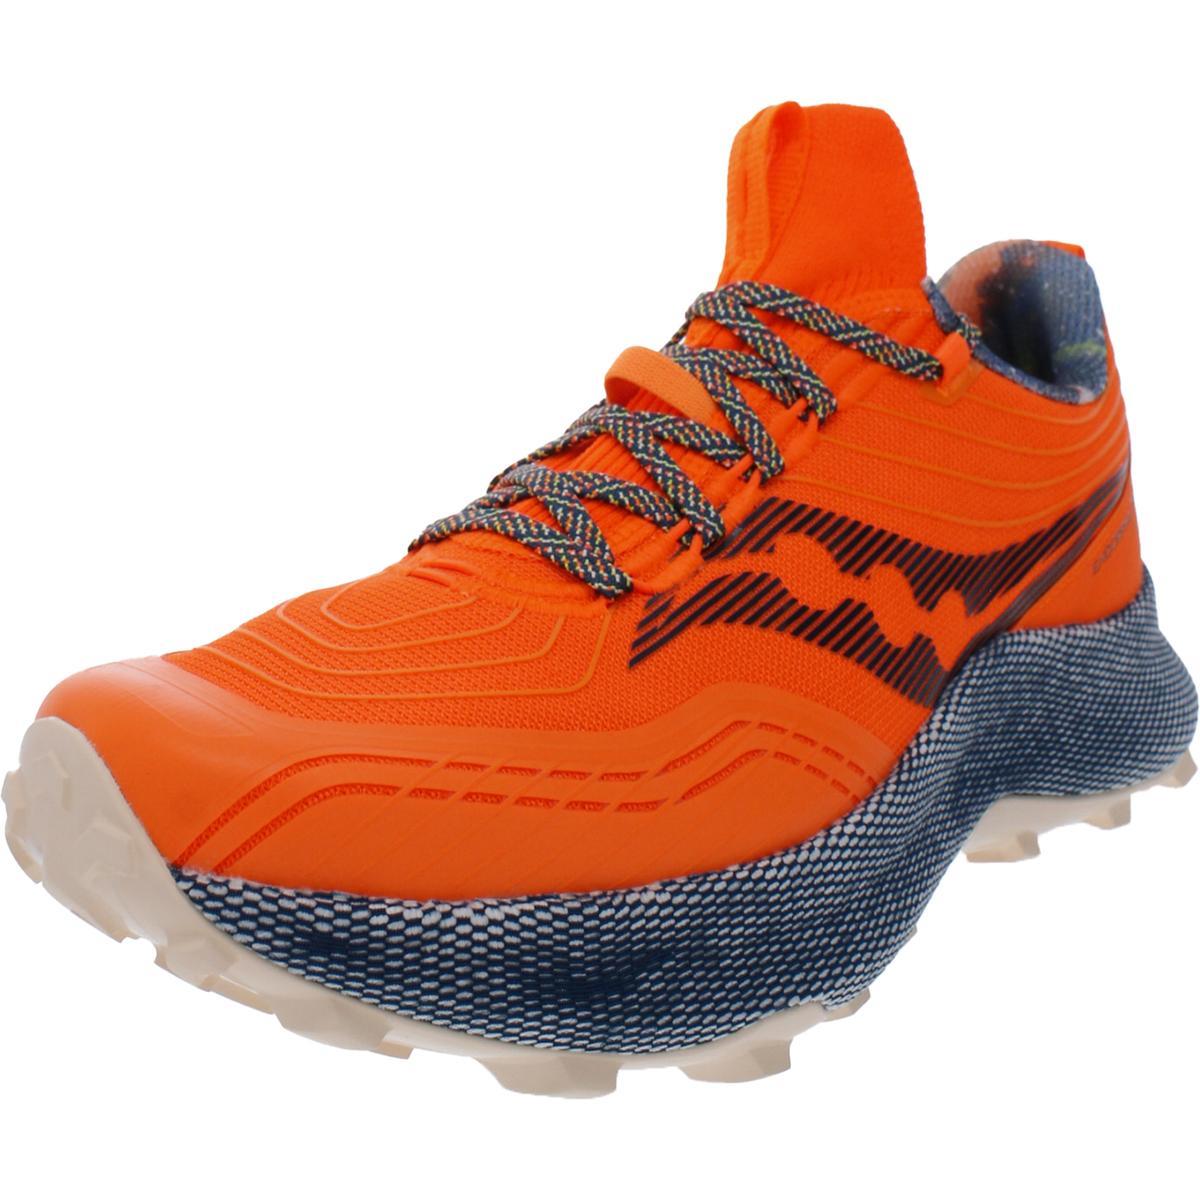 Saucony Mens Endorphin Trail Lugged Sole Running Hiking Shoes Sneakers Bhfo 3855 Campfire Story